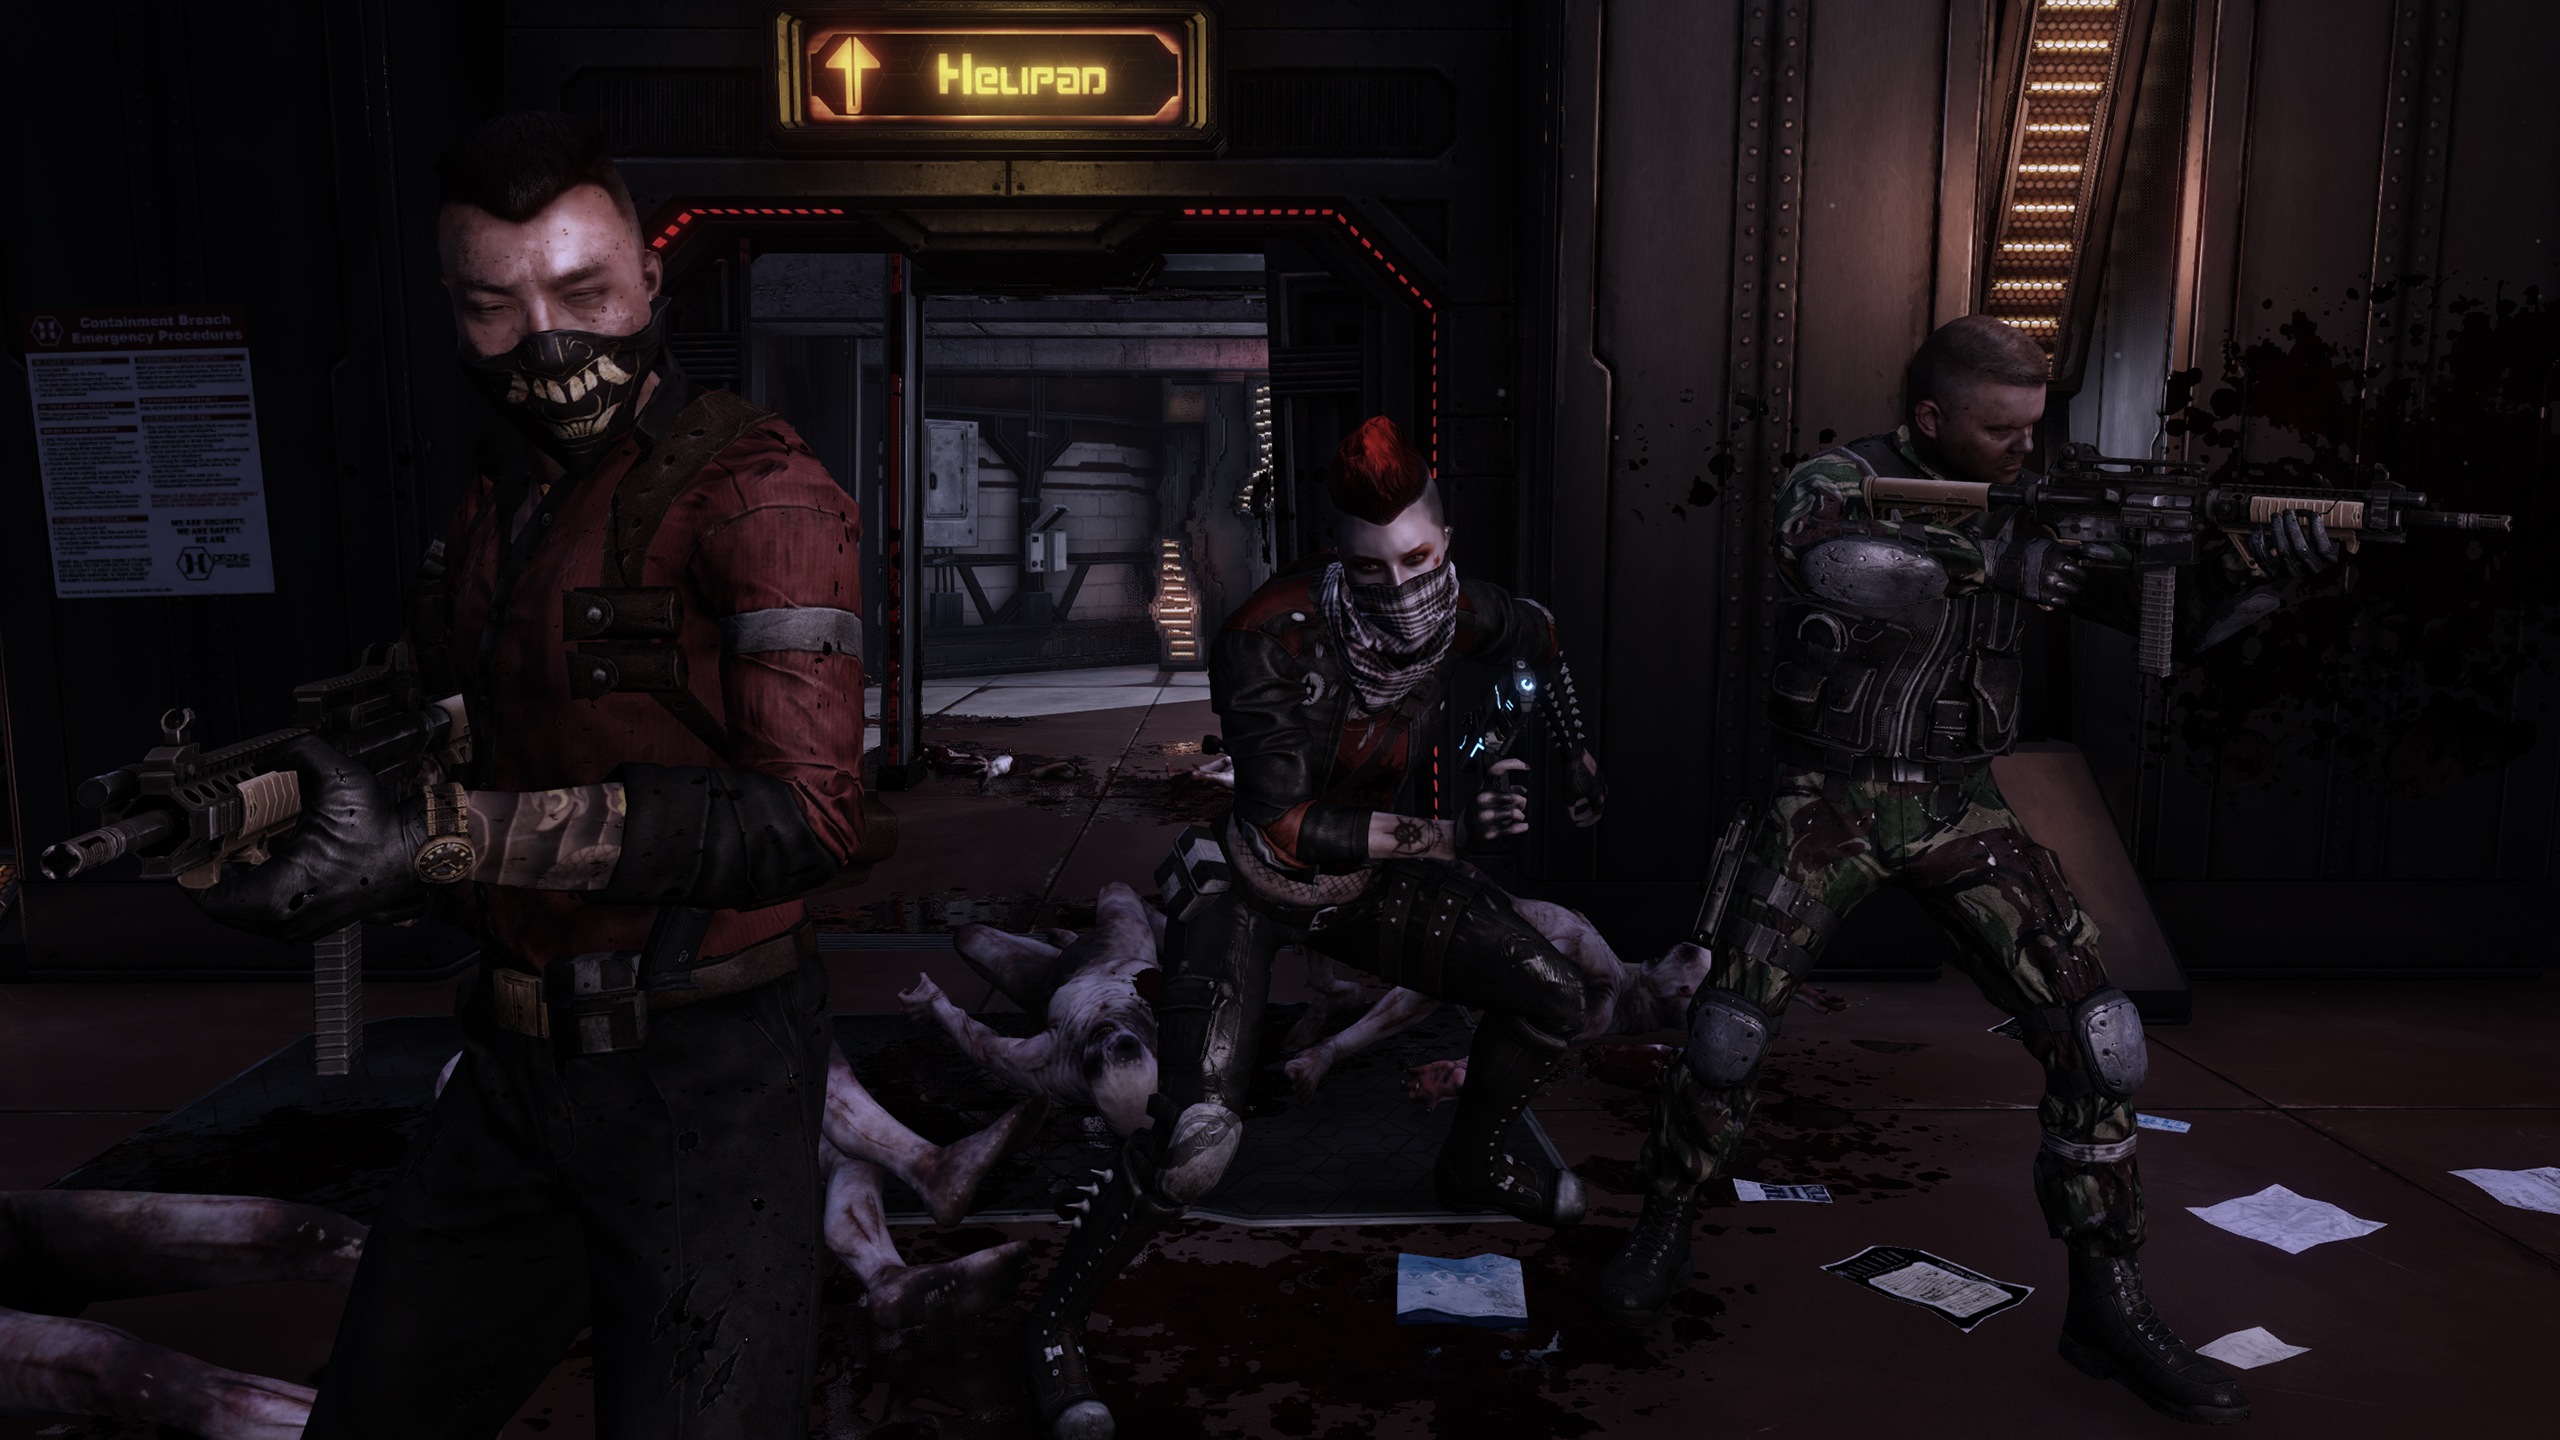 New Killing Floor 2 Screens Show Off The Scrake And Character Customization Rely On Horror